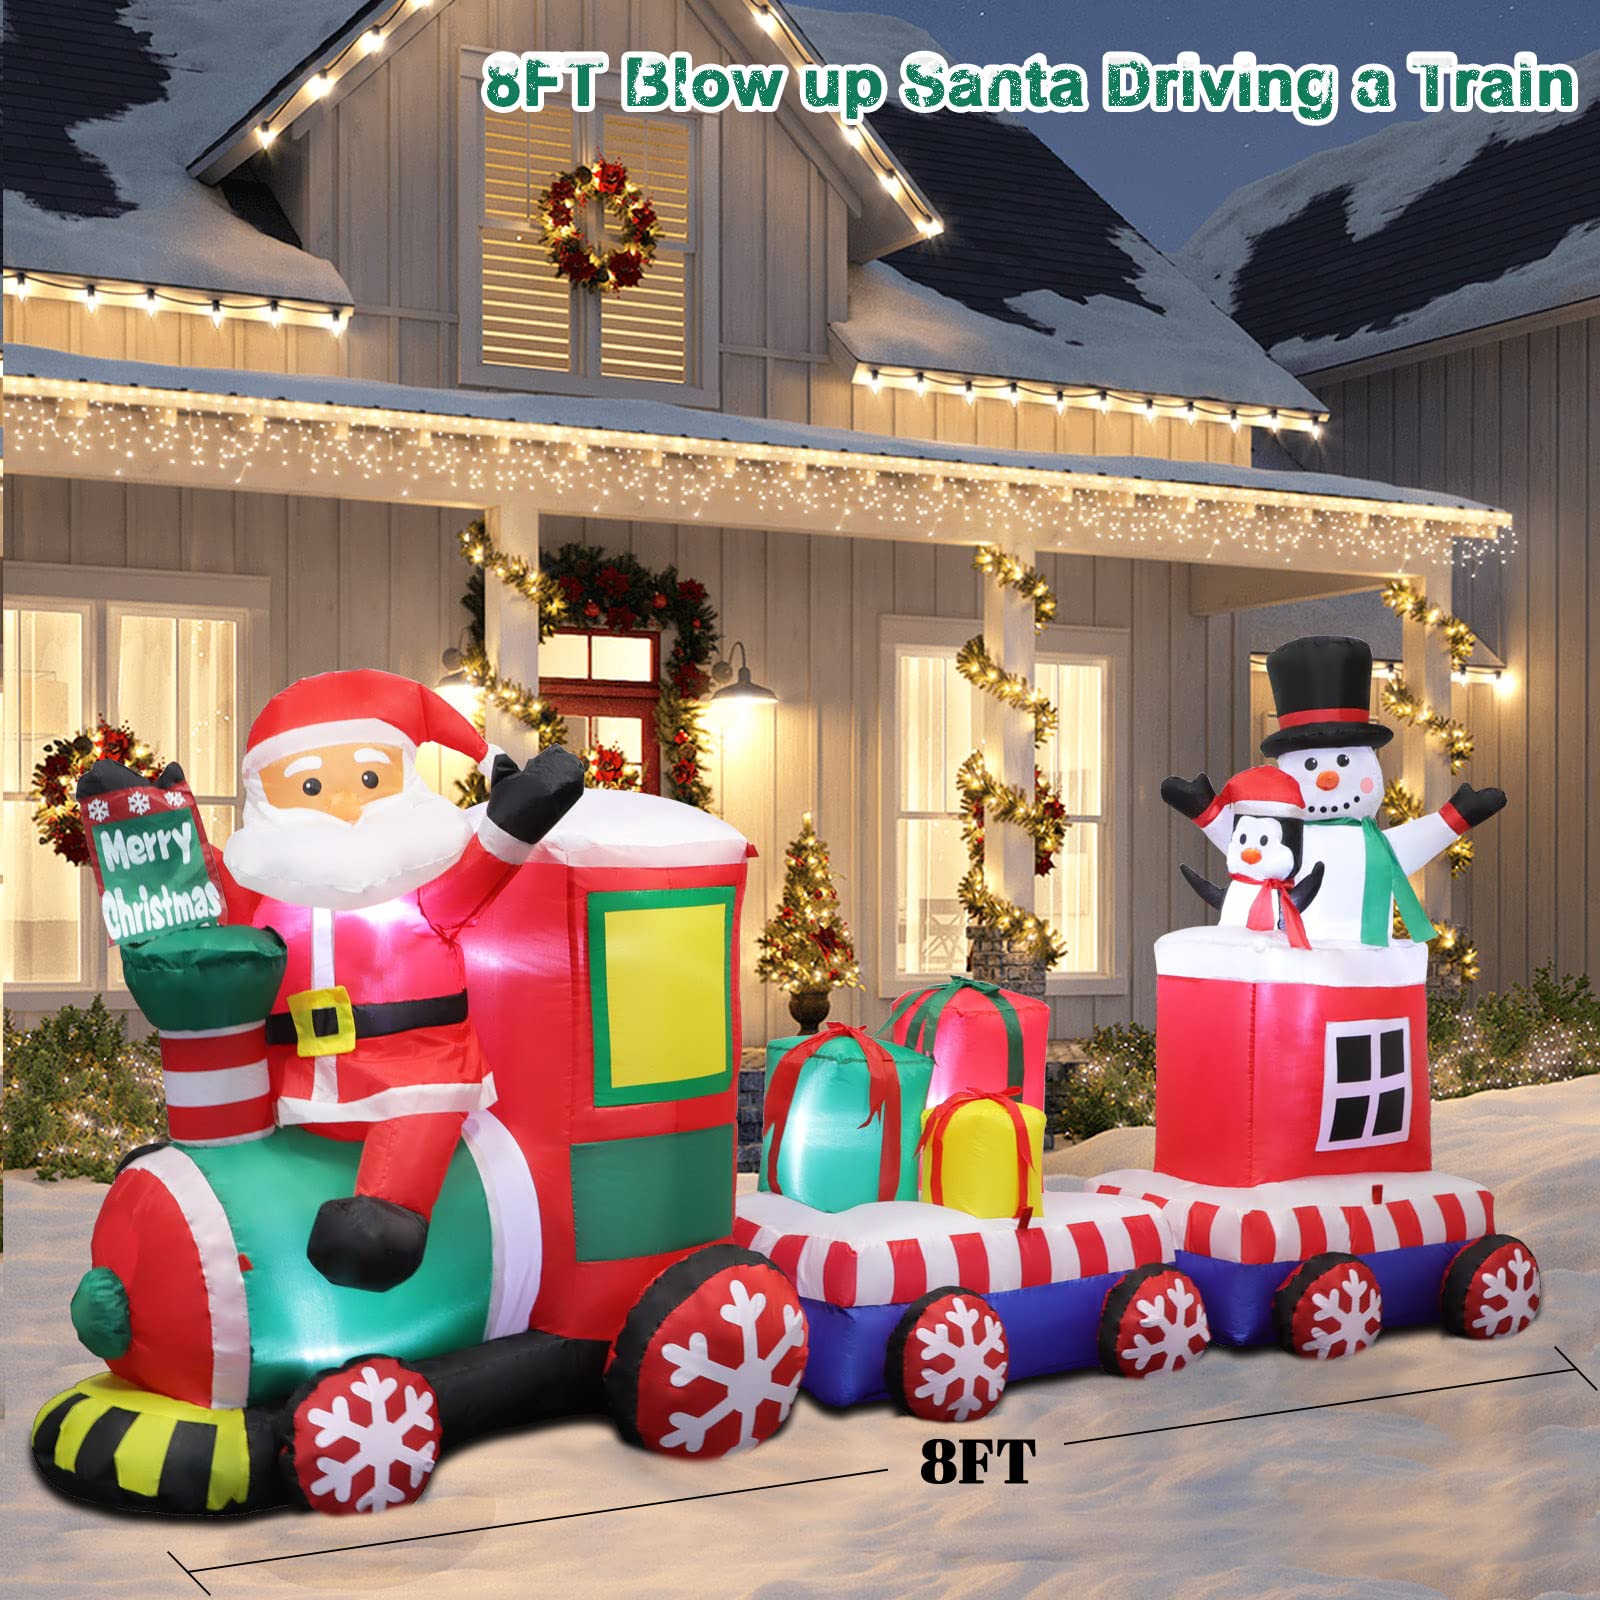 8 FT Christmas Inflatable Train with Santa Claus, Snowman, Penguin, Gift Boxes, Blow Up Yard Decorations with Built-in Lights, Lovely Xmas Train carriage for Holiday Display Lawn Garden Party Decor